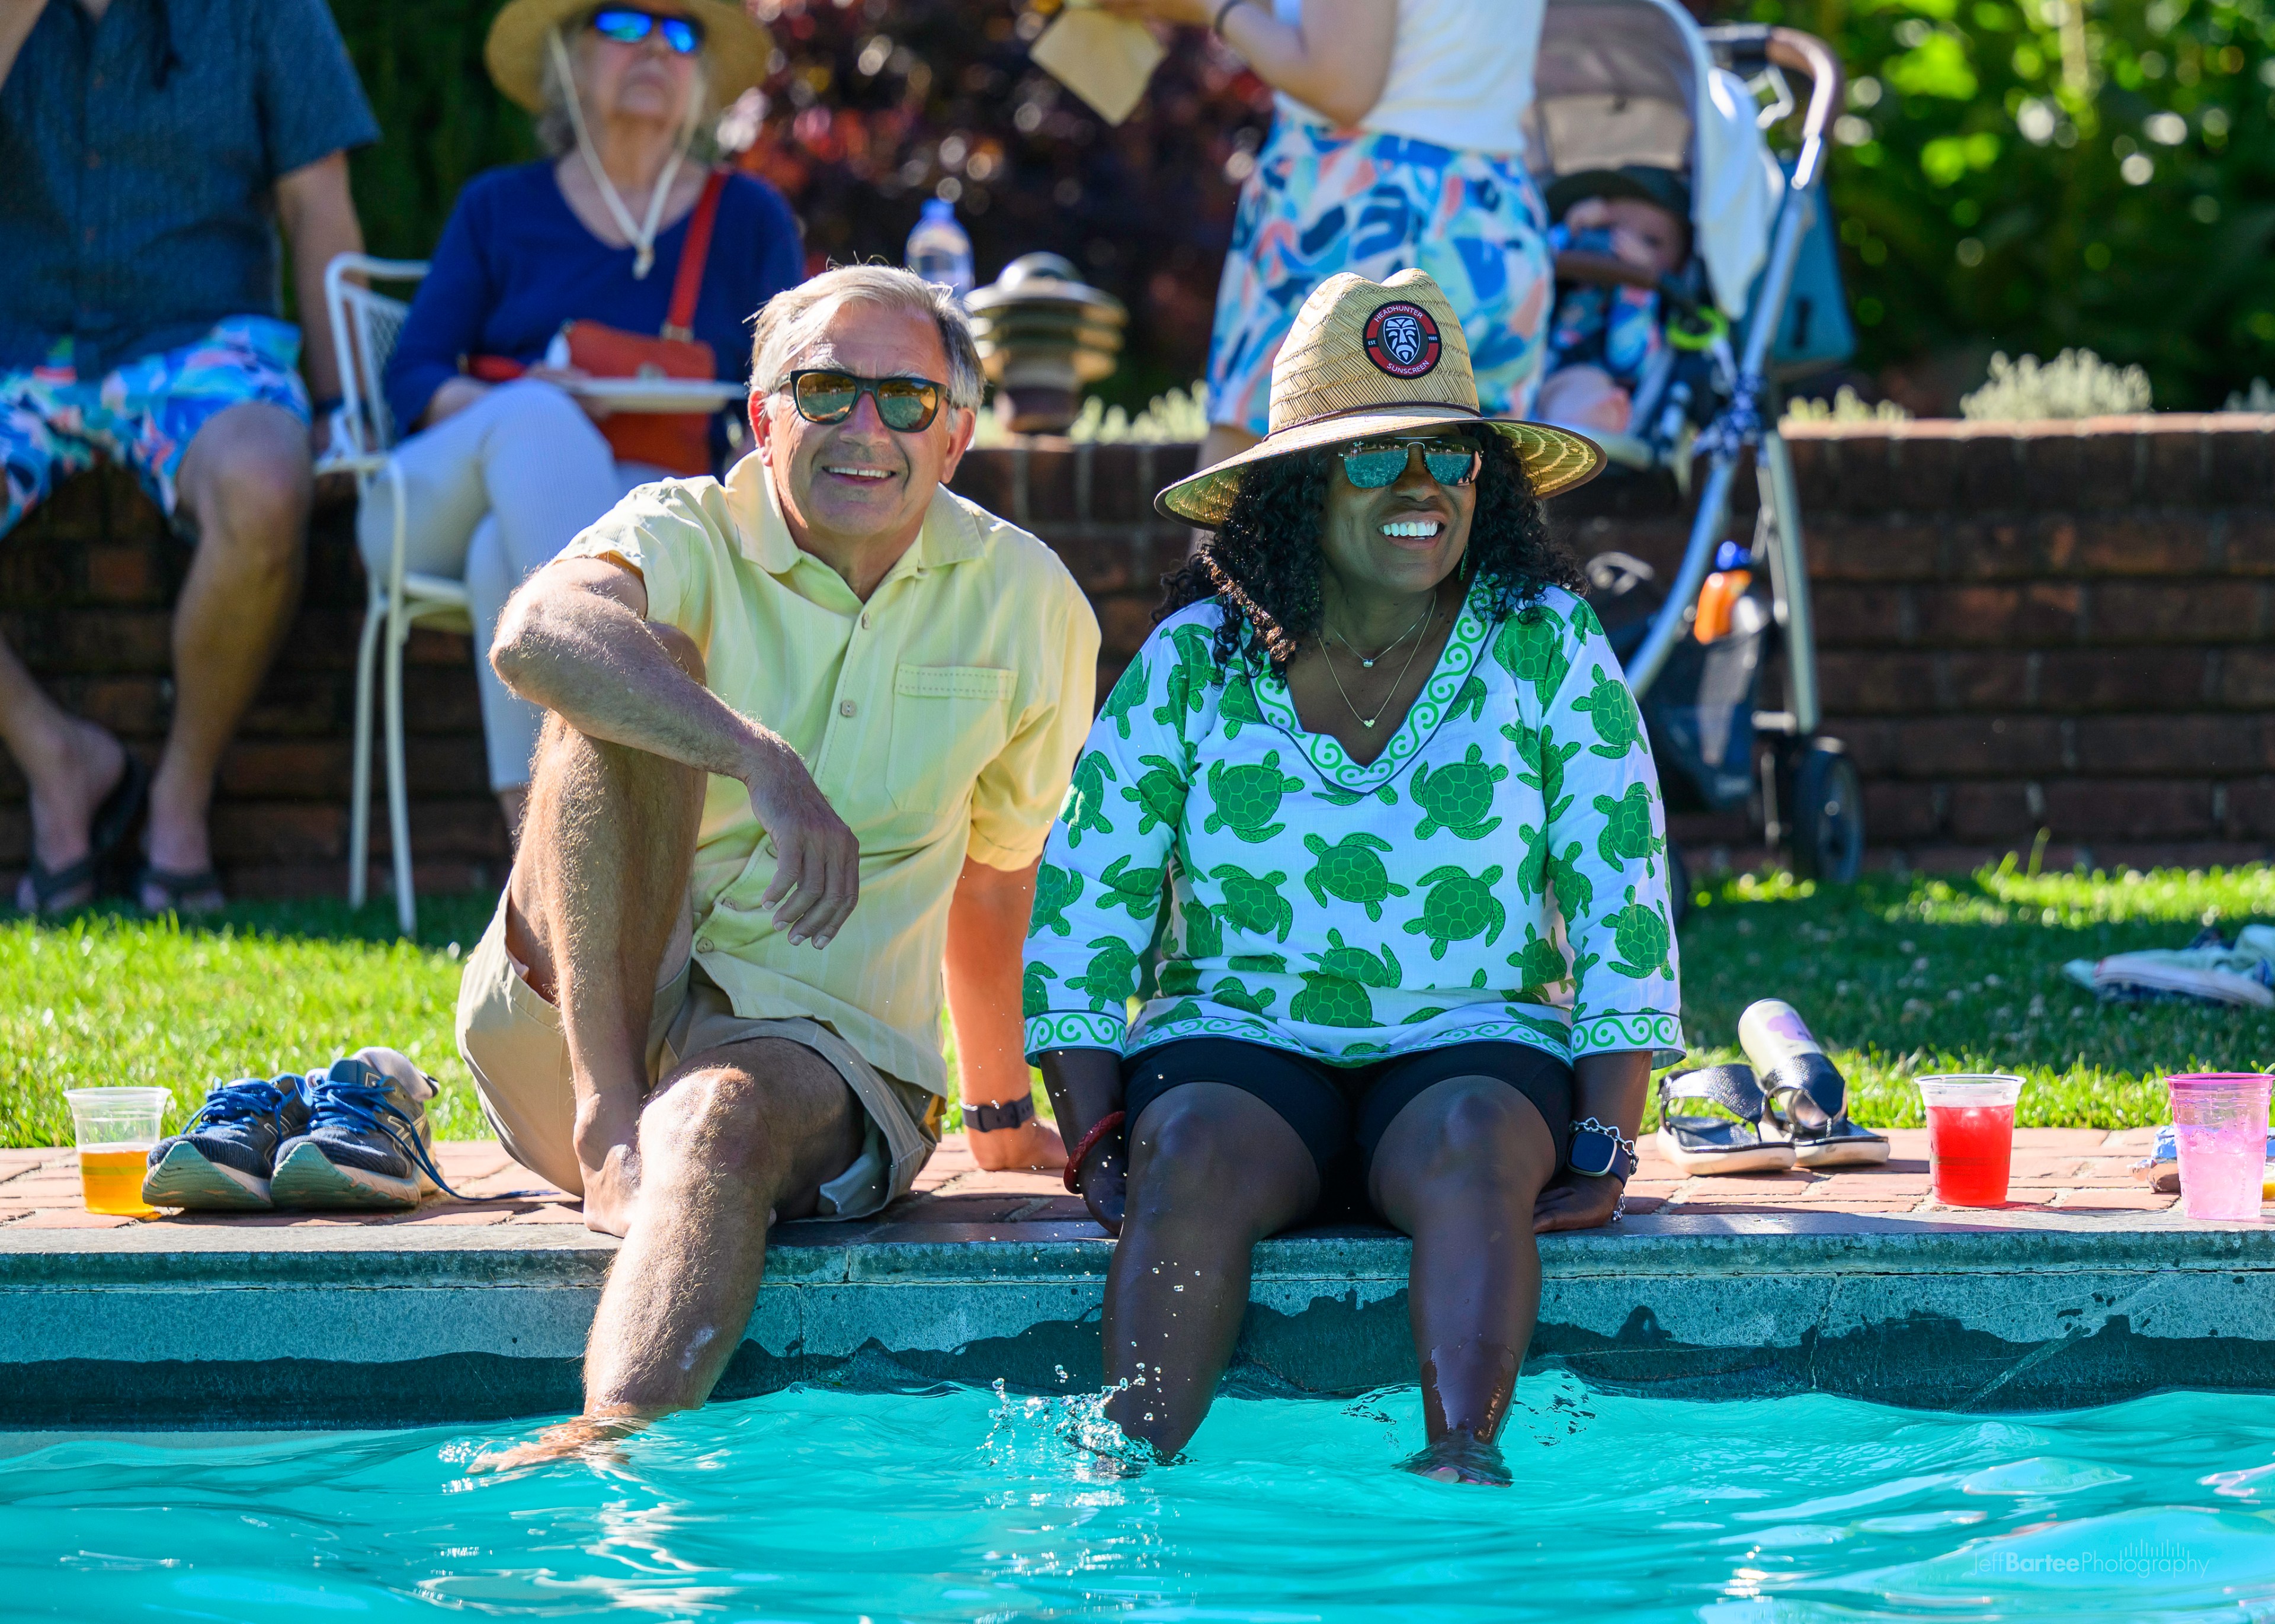 Two people sit by a pool, smiling and dipping their feet into the water. They are wearing summer clothes and hats, with drinks and belongings beside them.